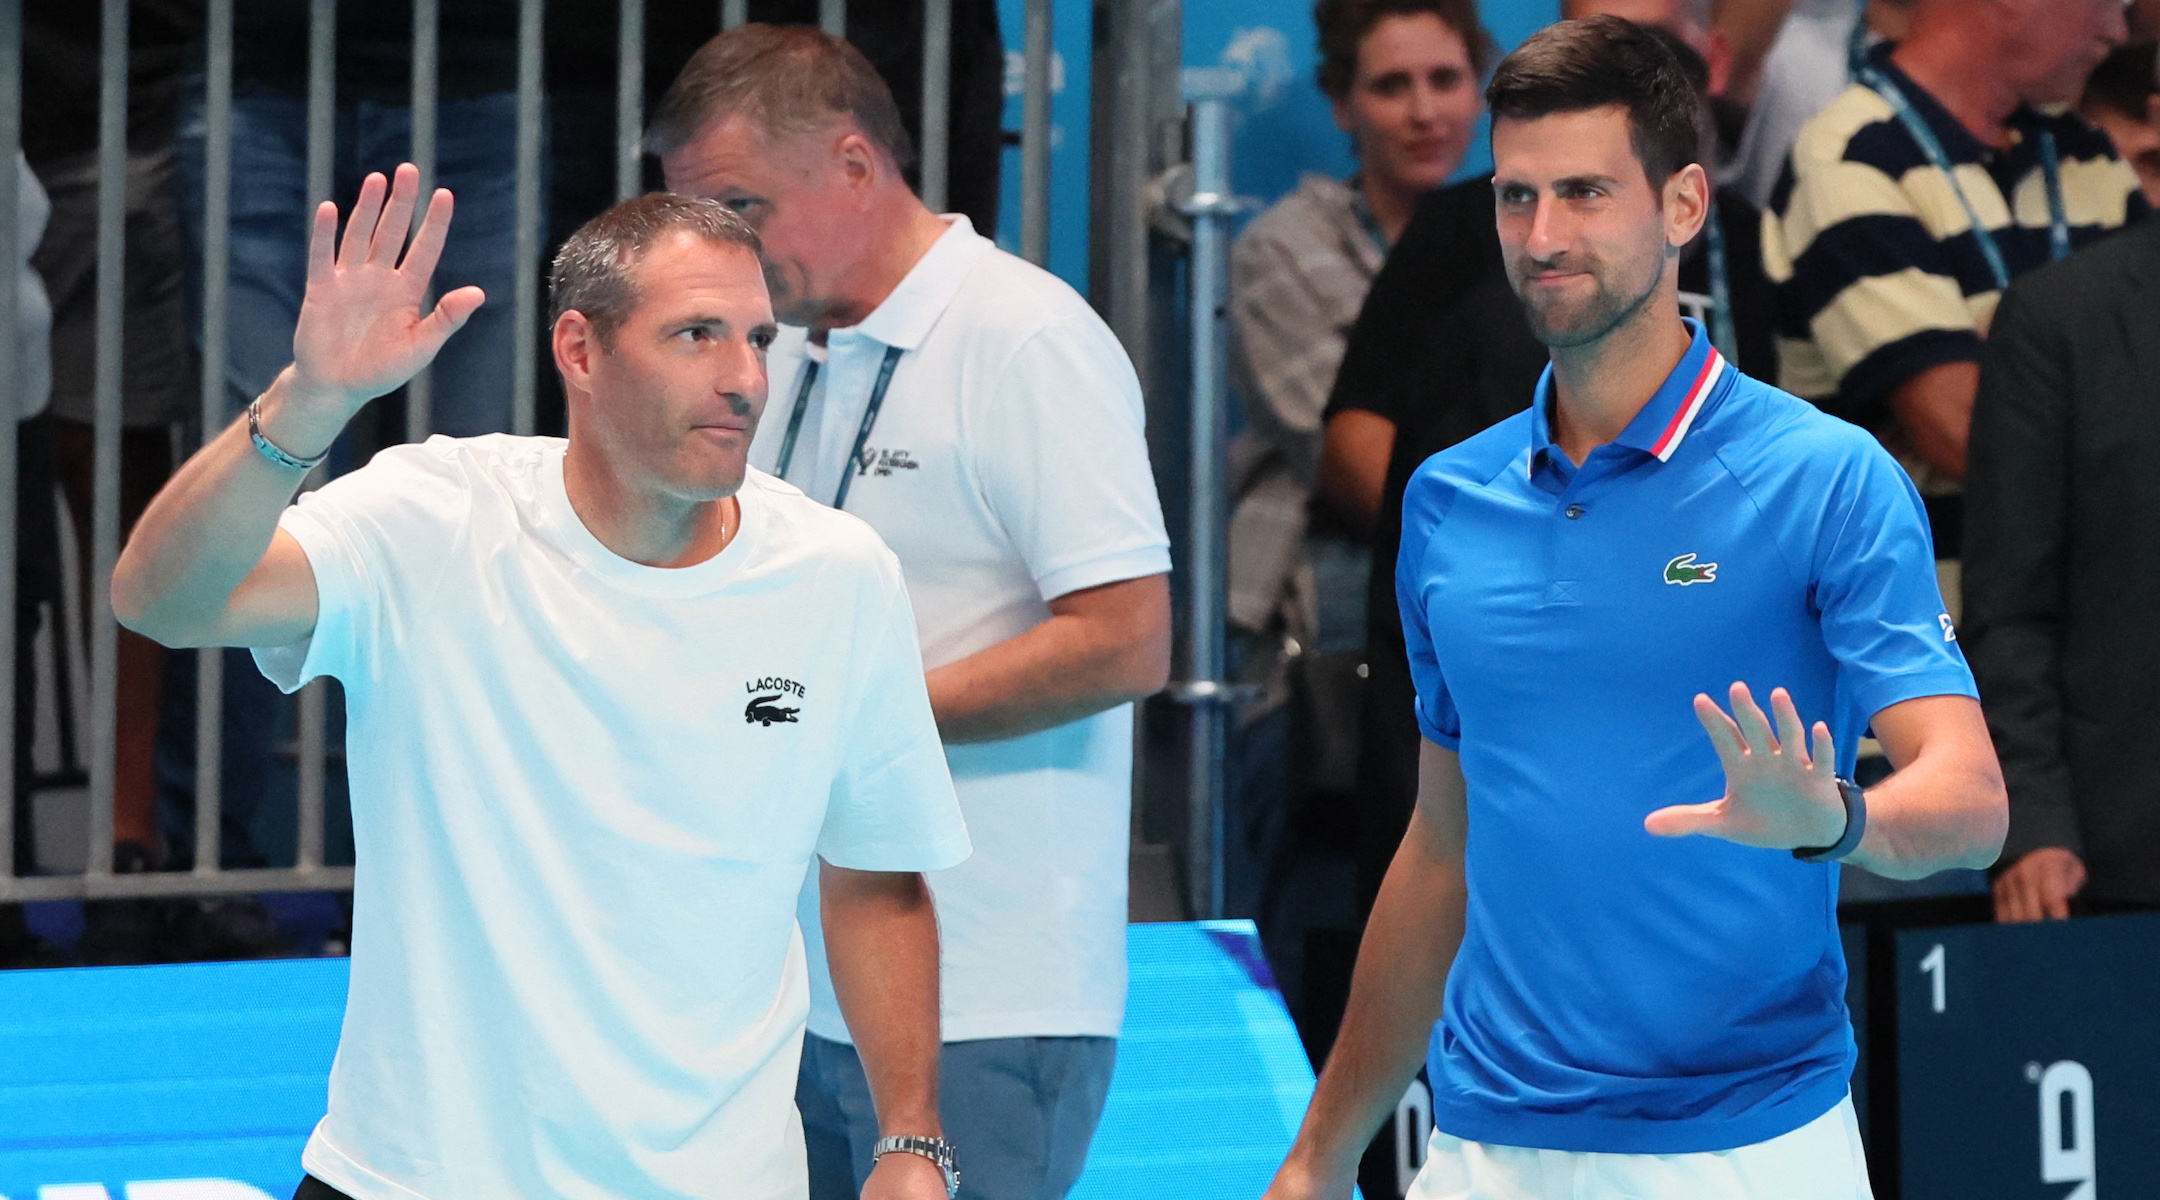  At relaunched Tel Aviv tennis tournament, Israeli doubles star Jonathan Erlich retires, Schwartzman loses early...